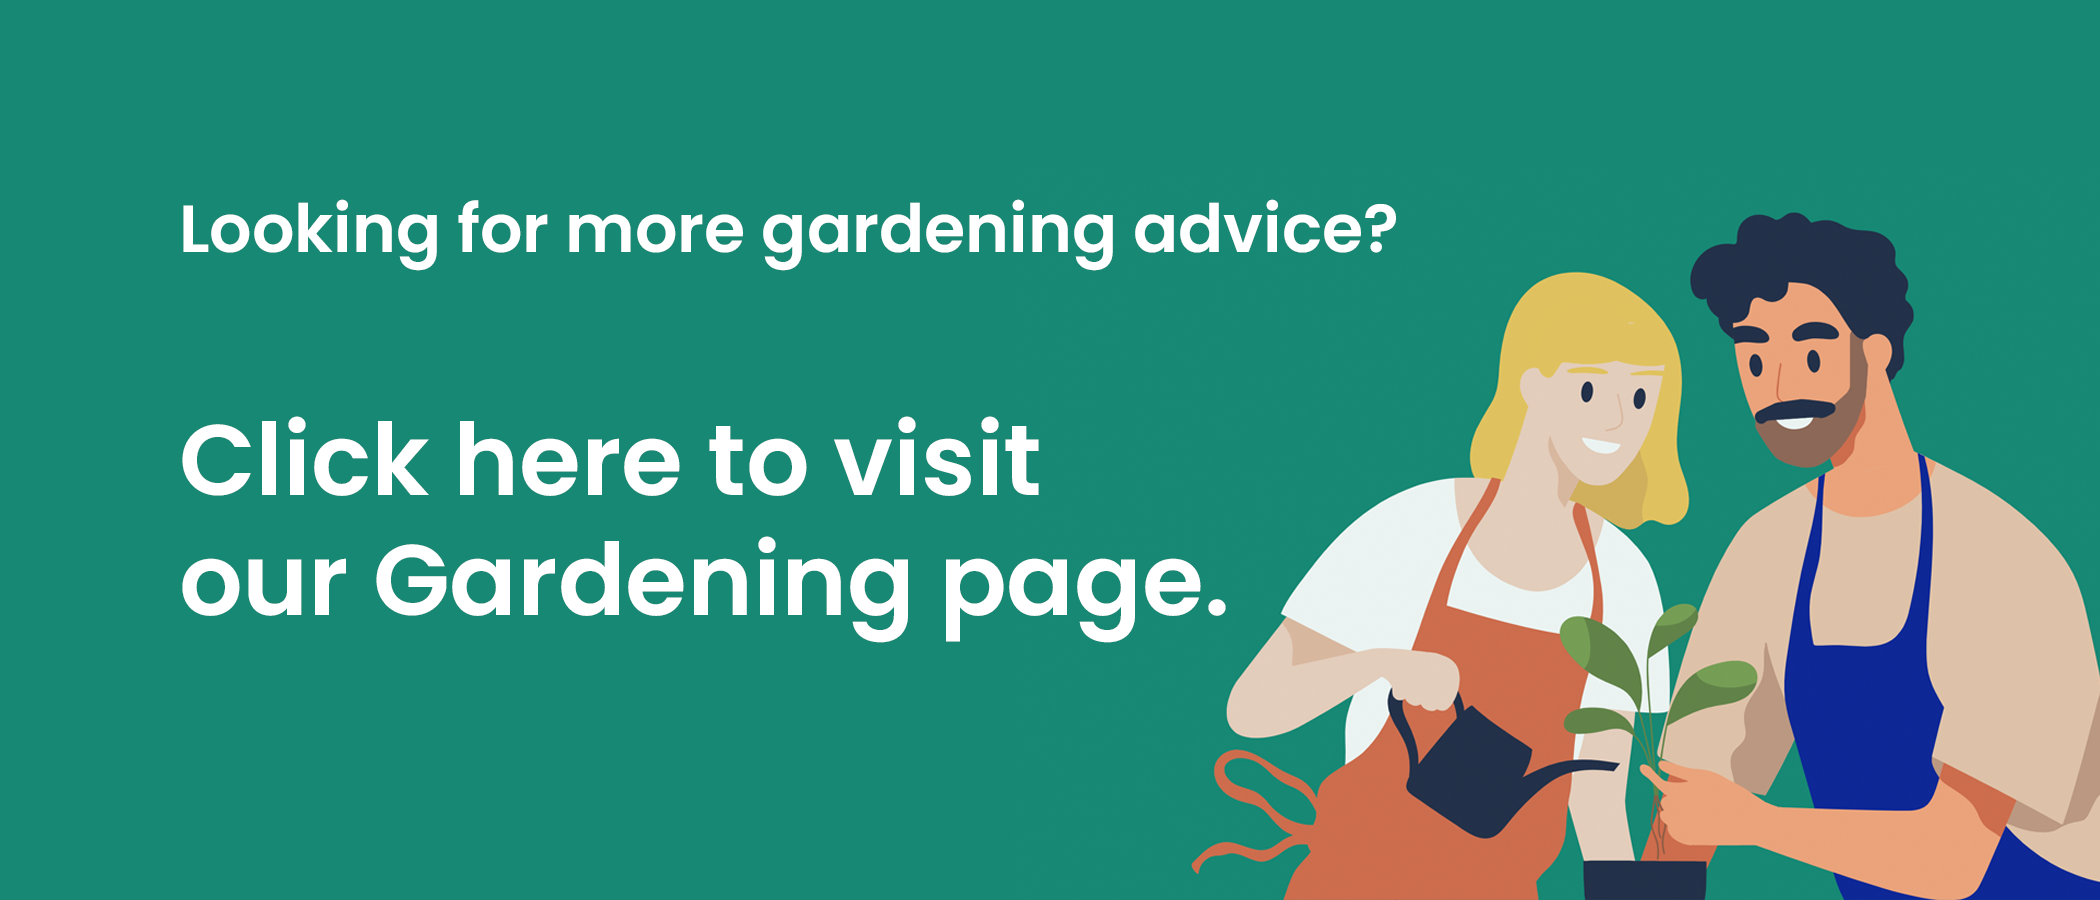 Click here for more gardening advice